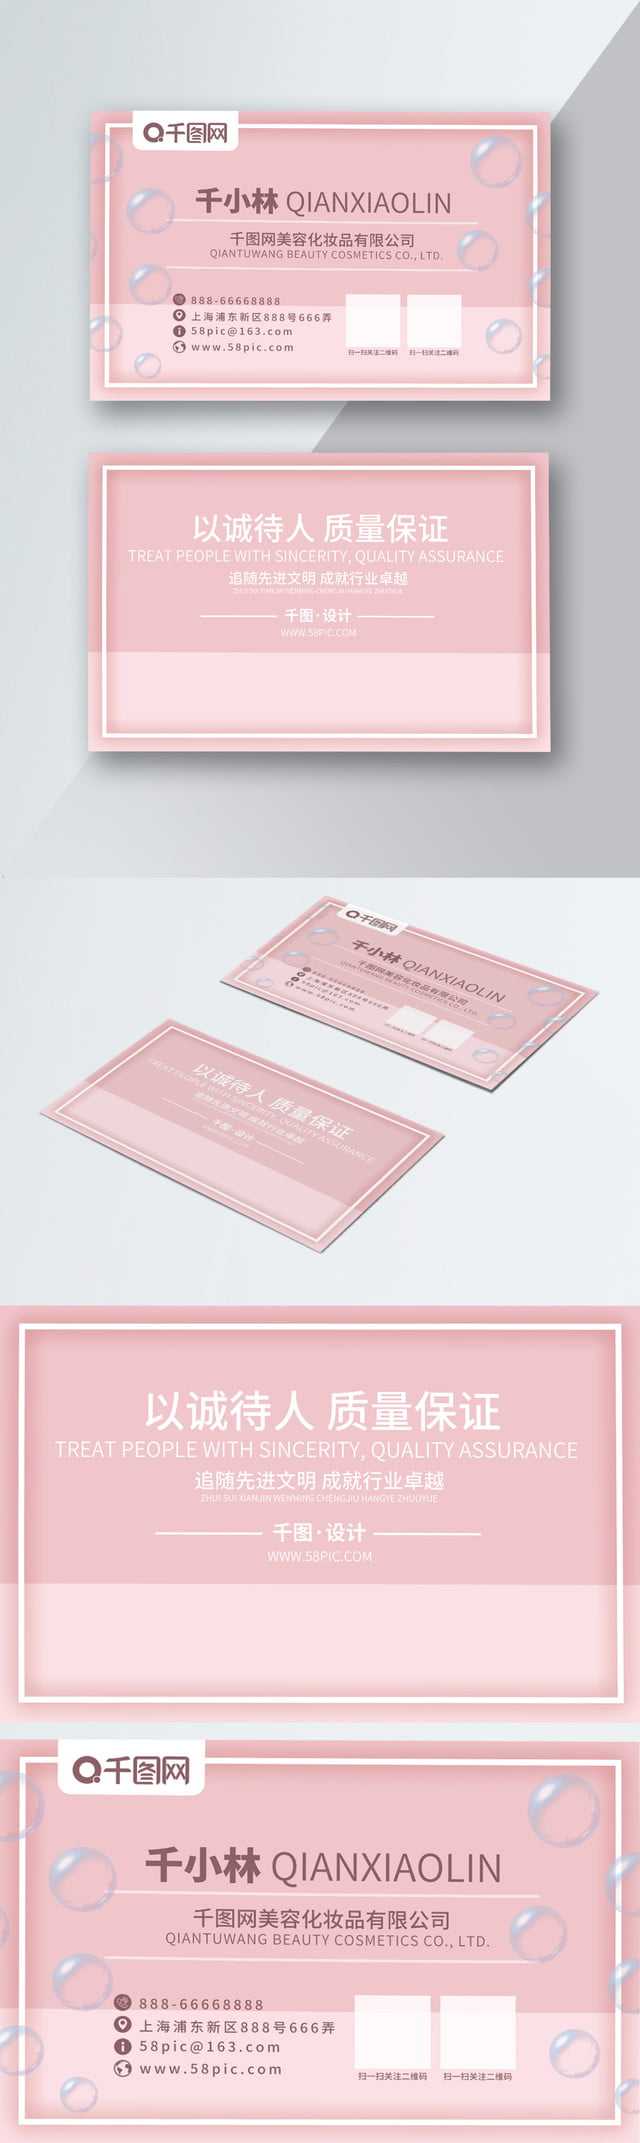 Mary Kay Business Card Free Download Cdr Background Creative For Mary Kay Business Cards Templates Free